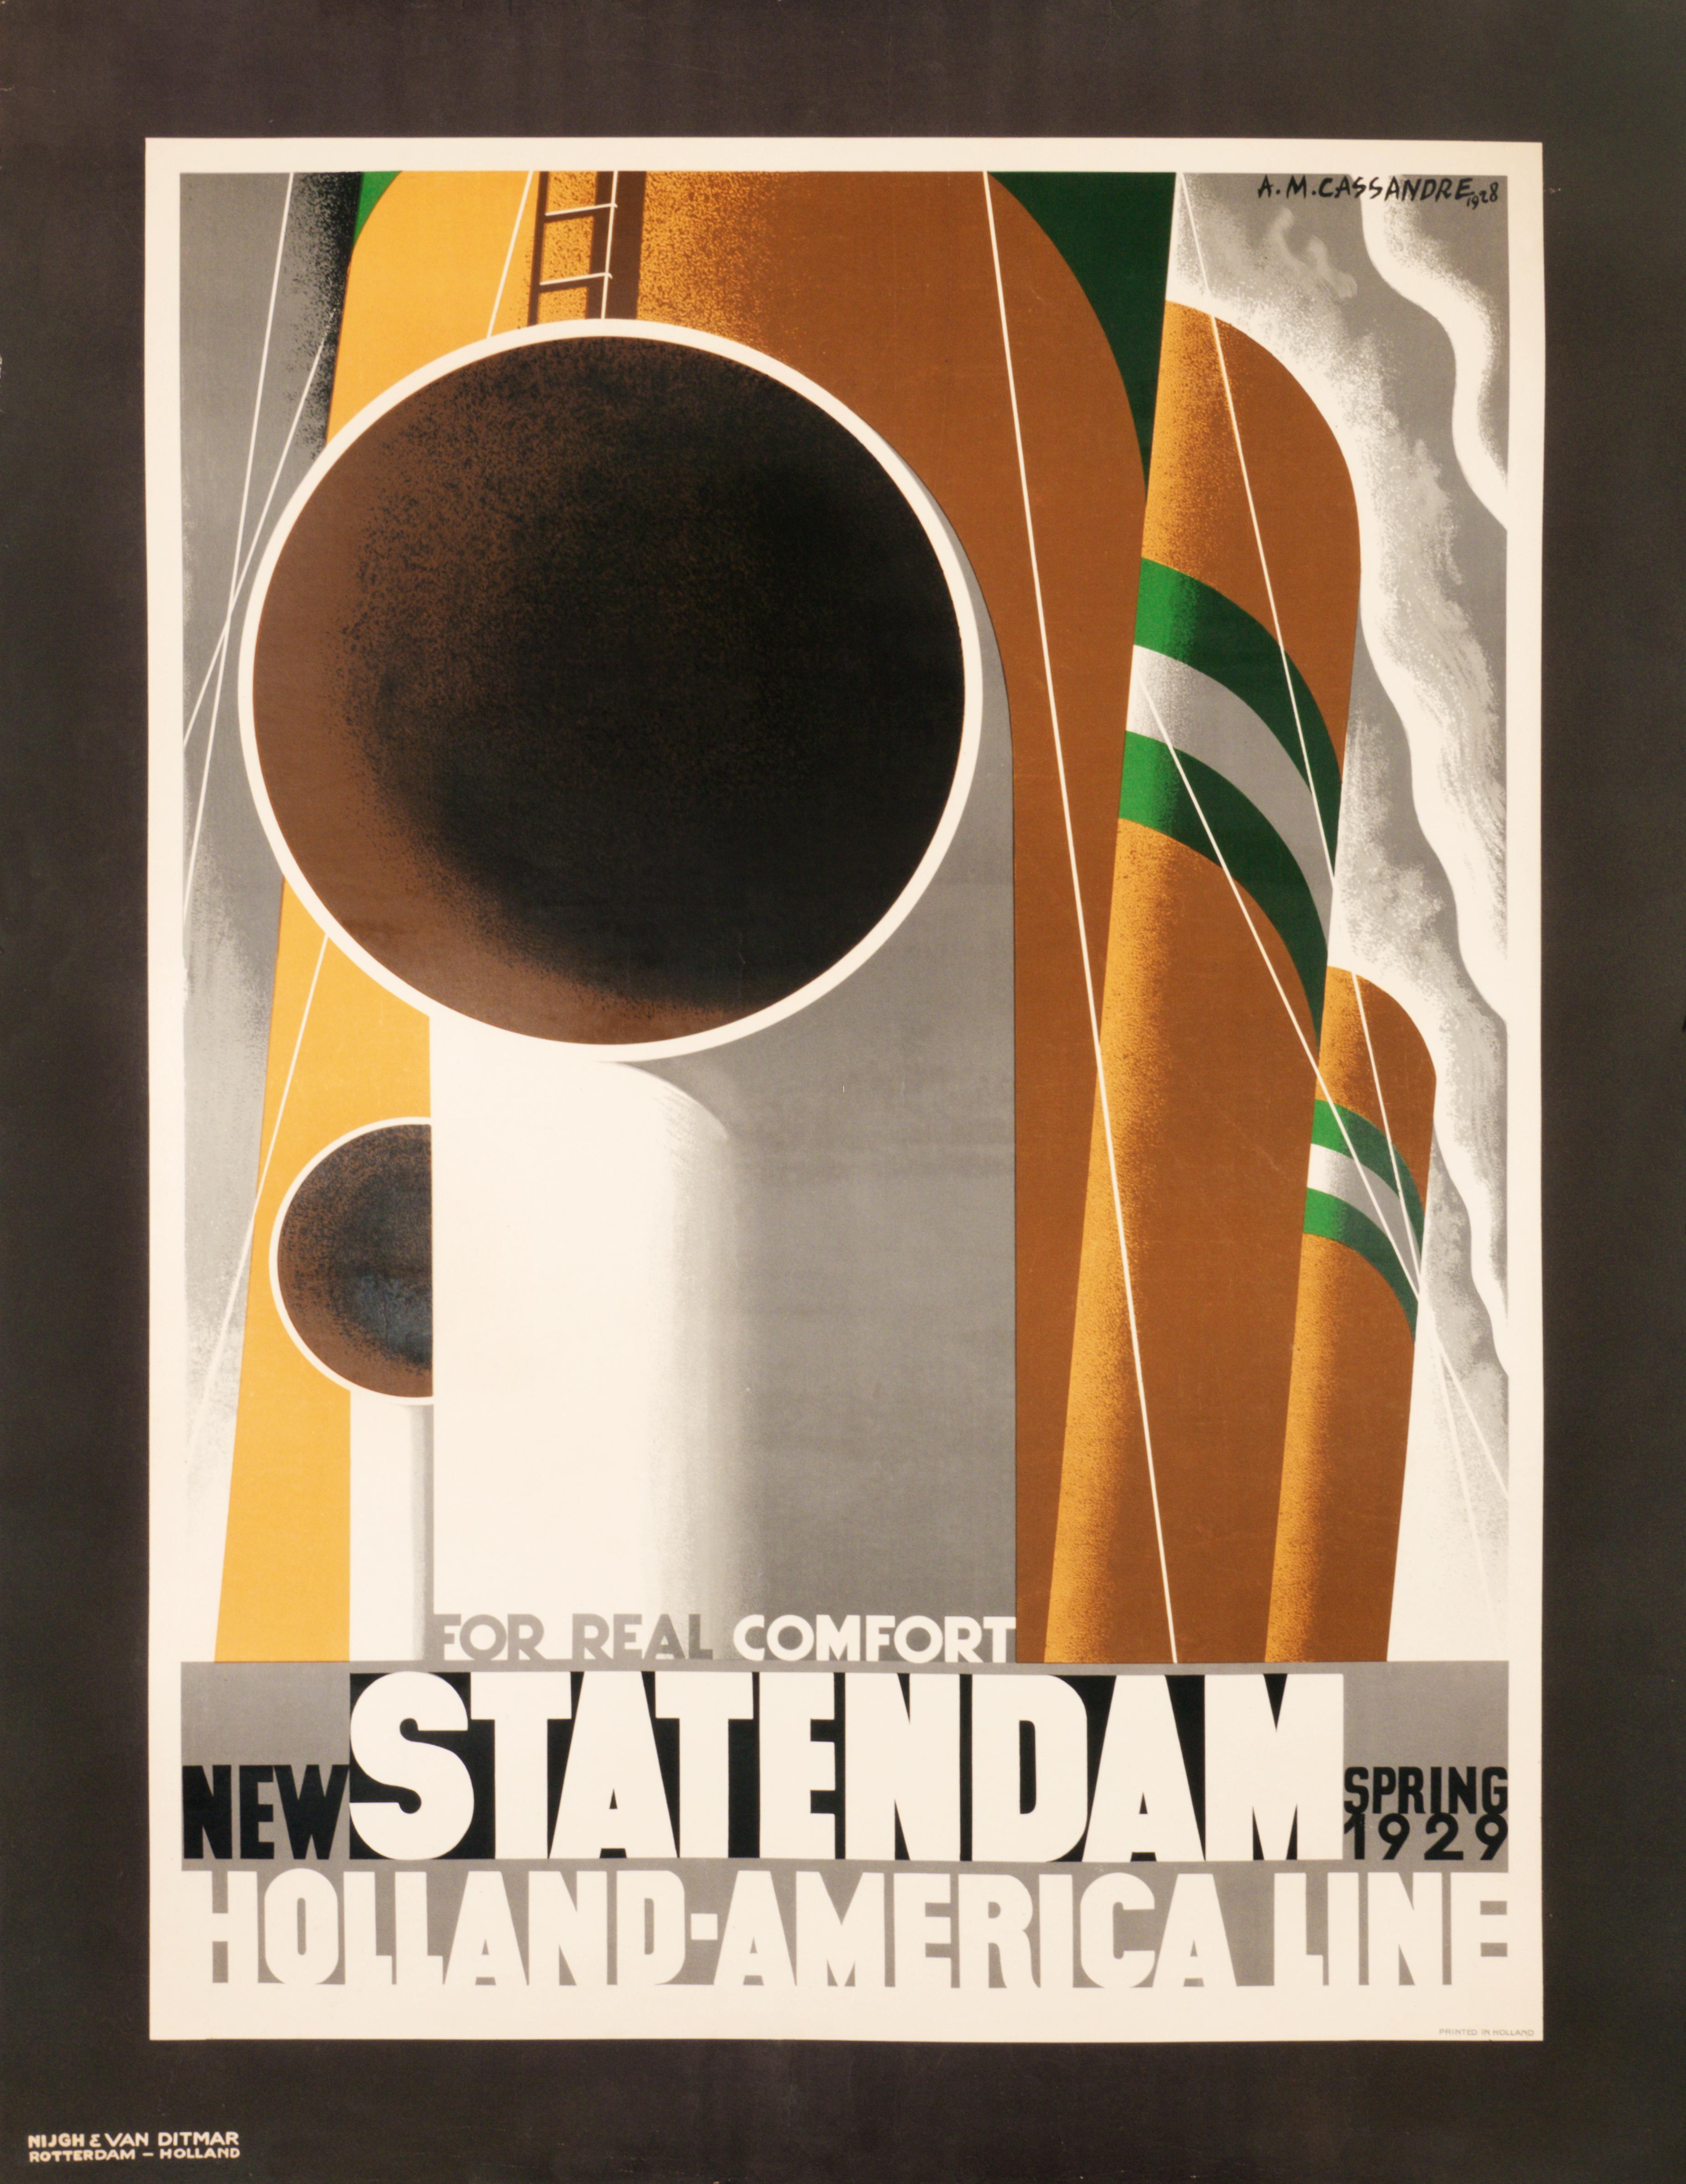 "New Statendam for Real Comfort" Original Vintage Travel Poster 1920s - Print by Adolphe Mouron Cassandre